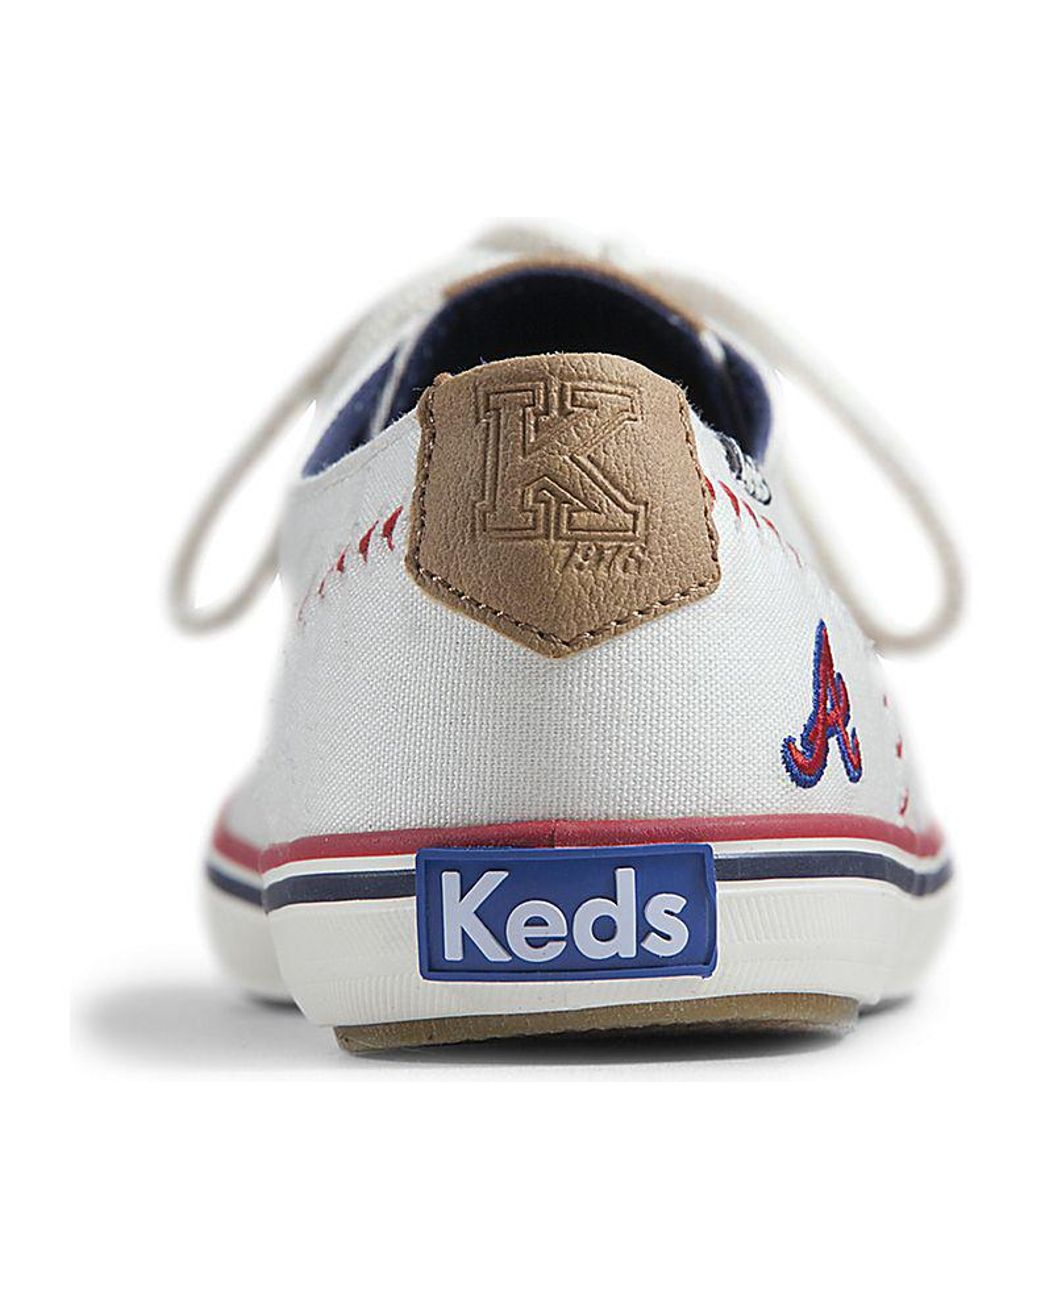 keds champion pennant leather